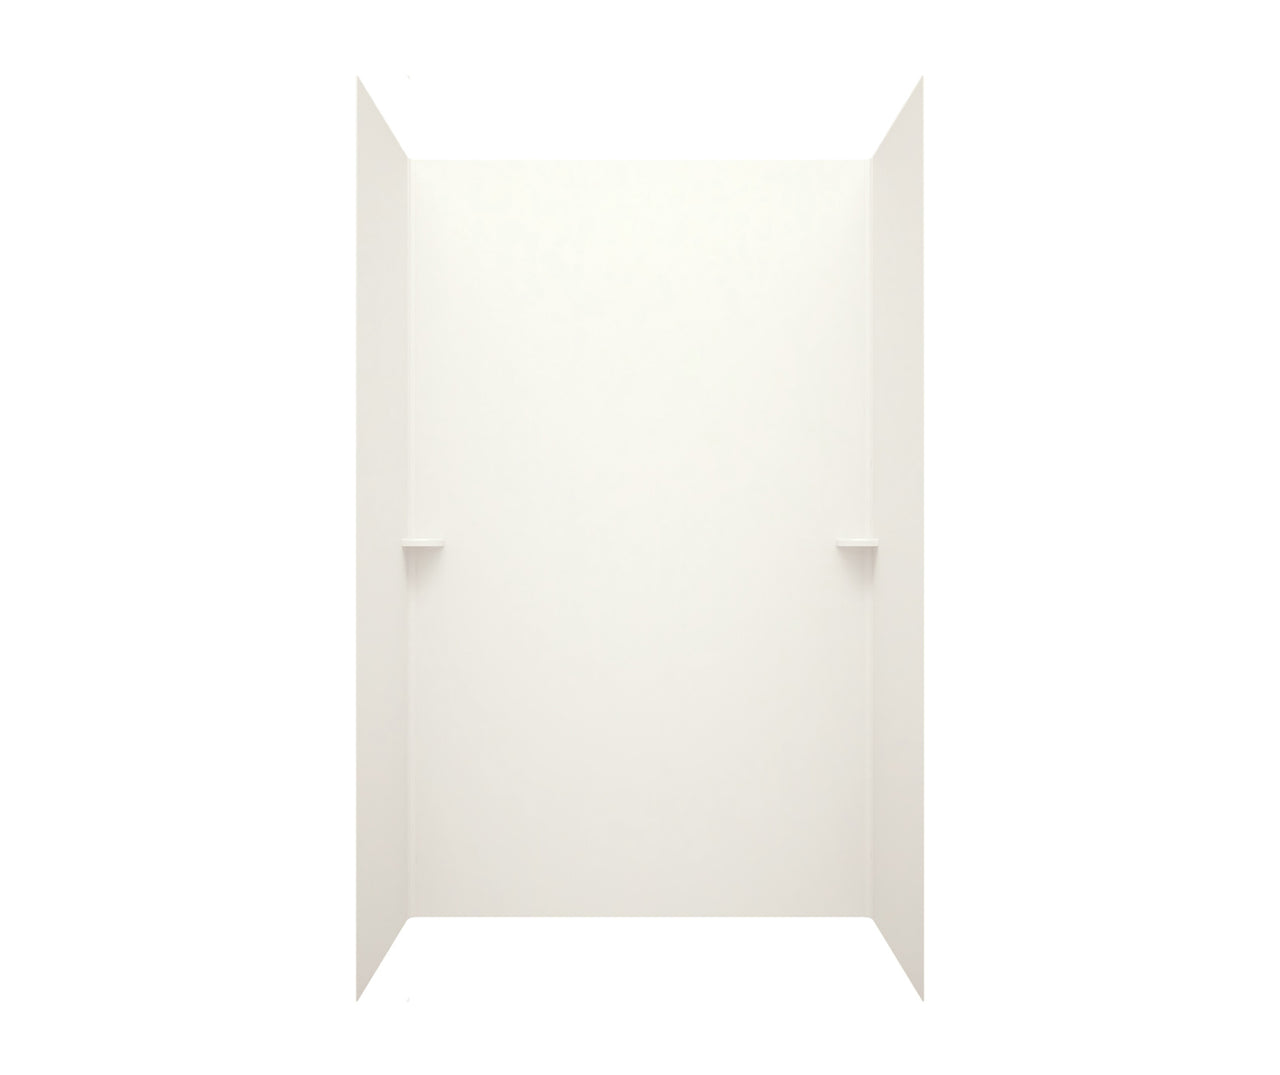 SK-363696 36 x 36 x 96 Swanstone Smooth Glue up Shower Wall Kit in Bisque